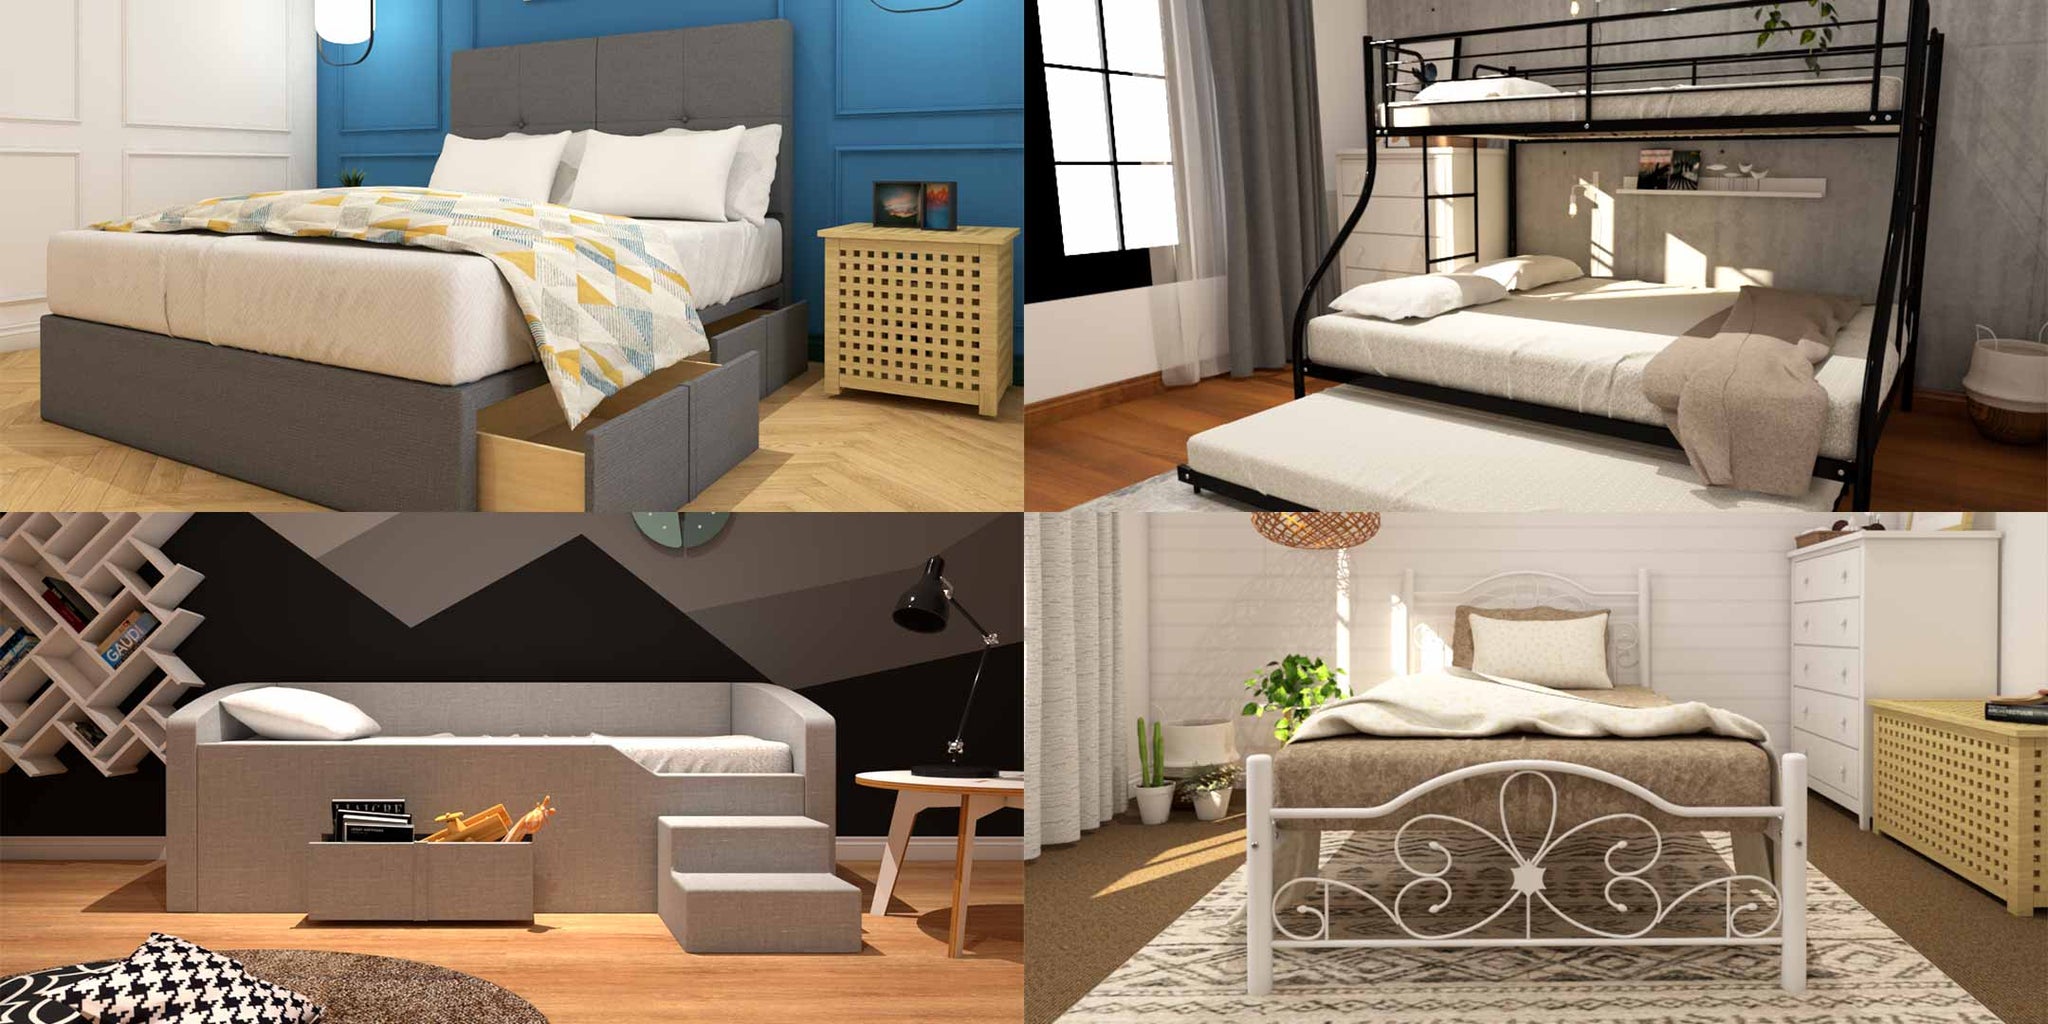 Different Styles of Bed frame - Storage Bed, Bunk Bed, Daybed, Metal bed